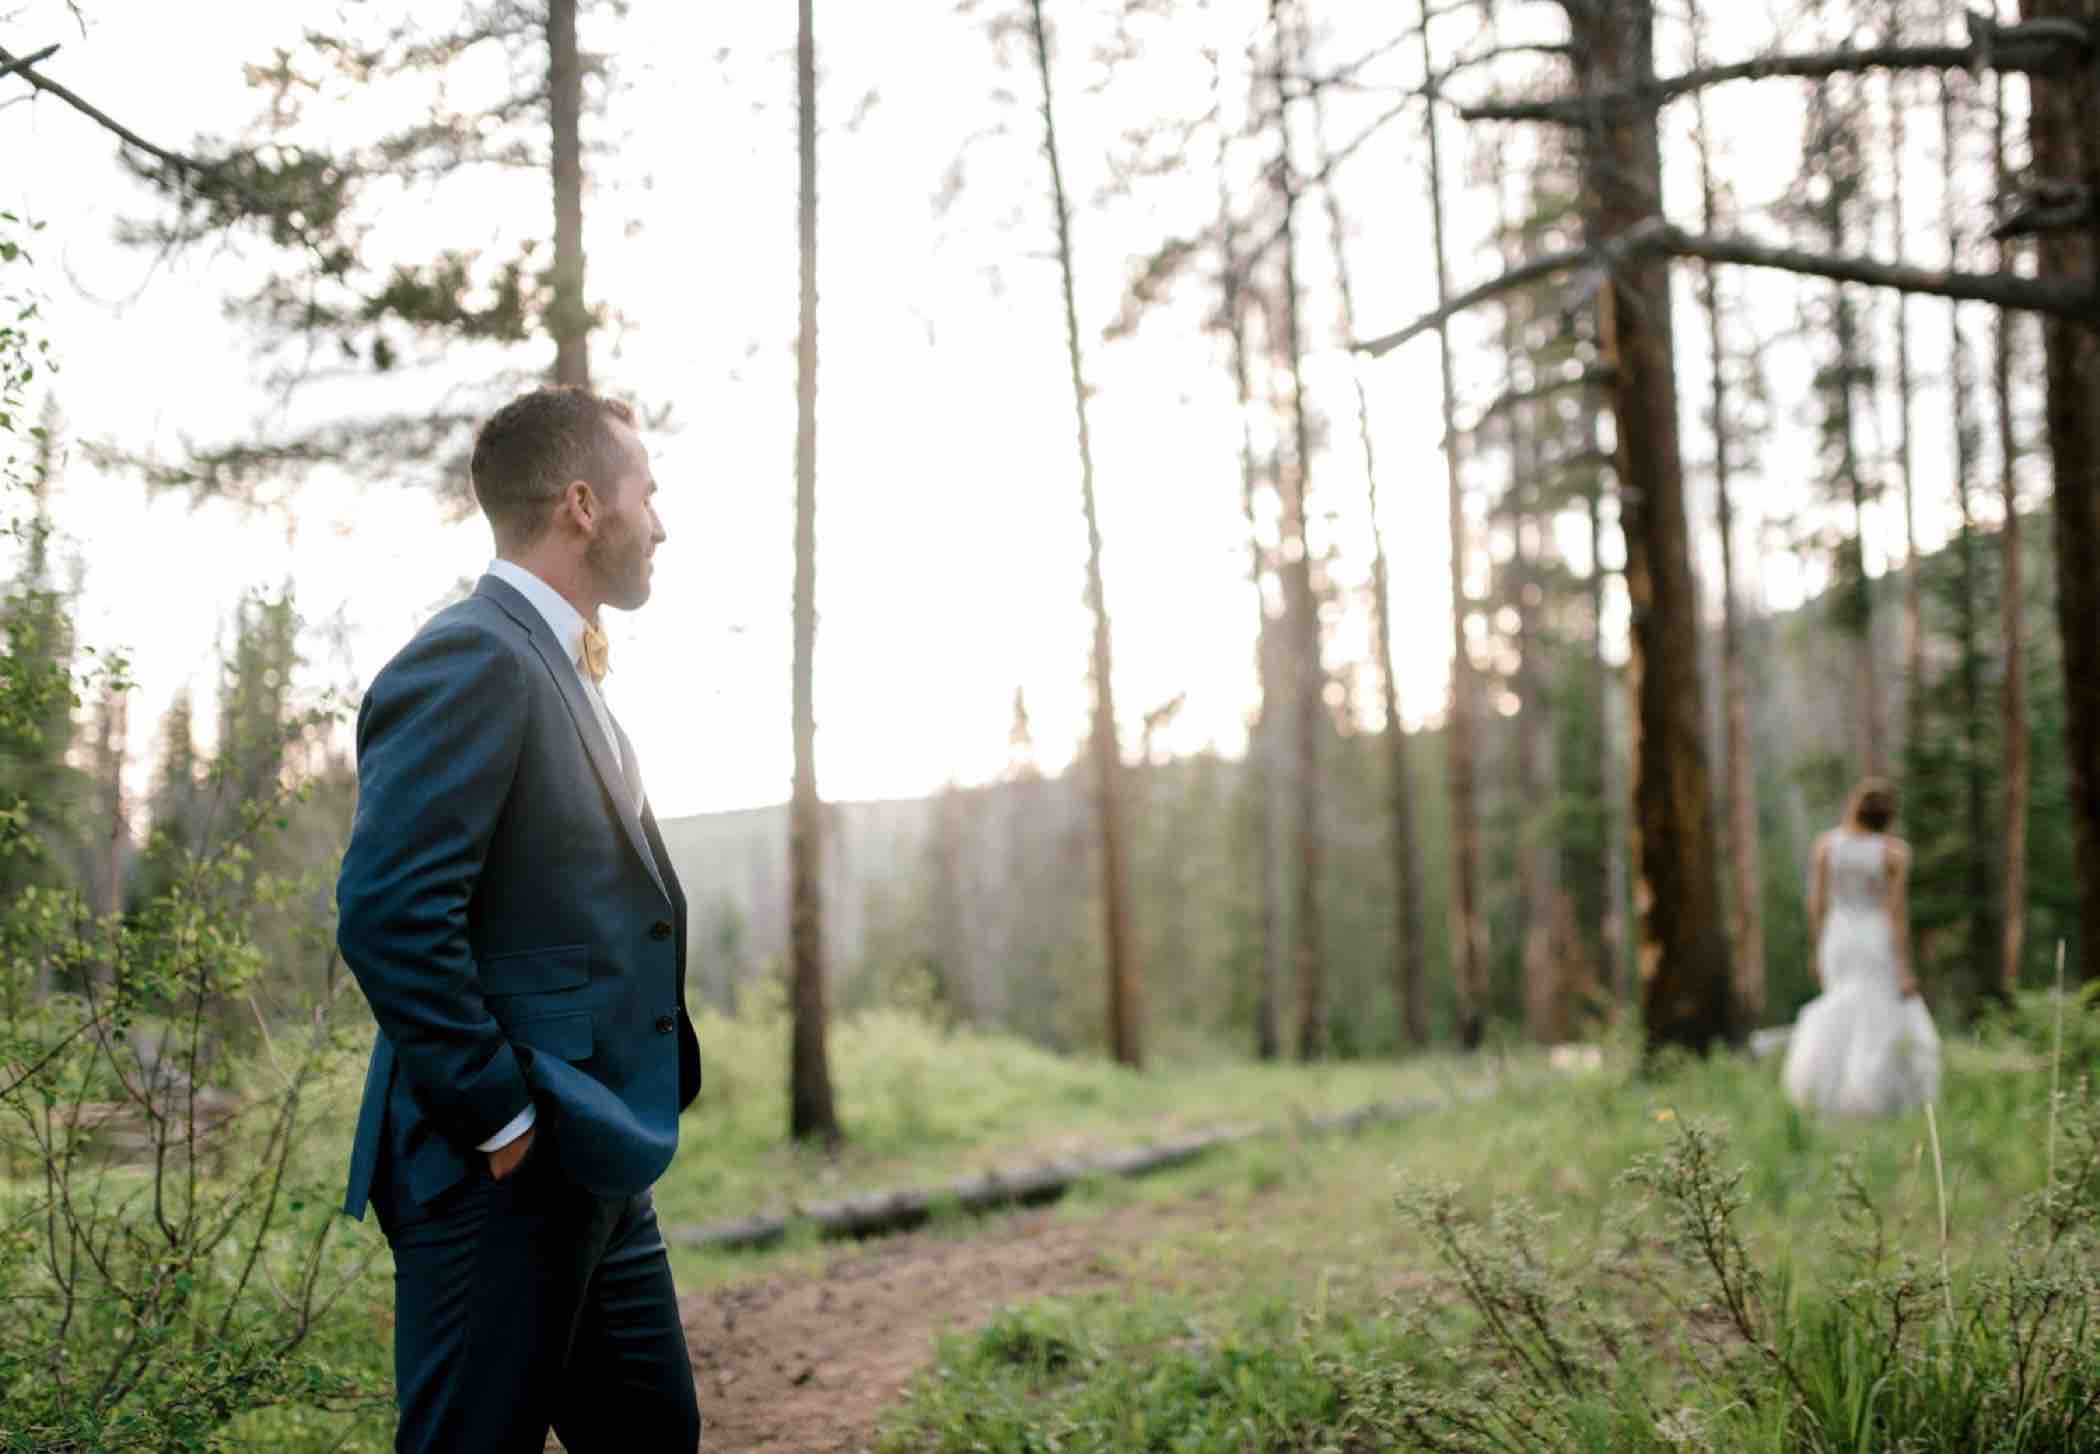 Kris the groom watches his bride Sallie walk through the pine forest outside Piney River Ranch in Vail, Colorado. Photo by Ali and Garrett, Romantic, Adventurous, Nostalgic Wedding Photographers.